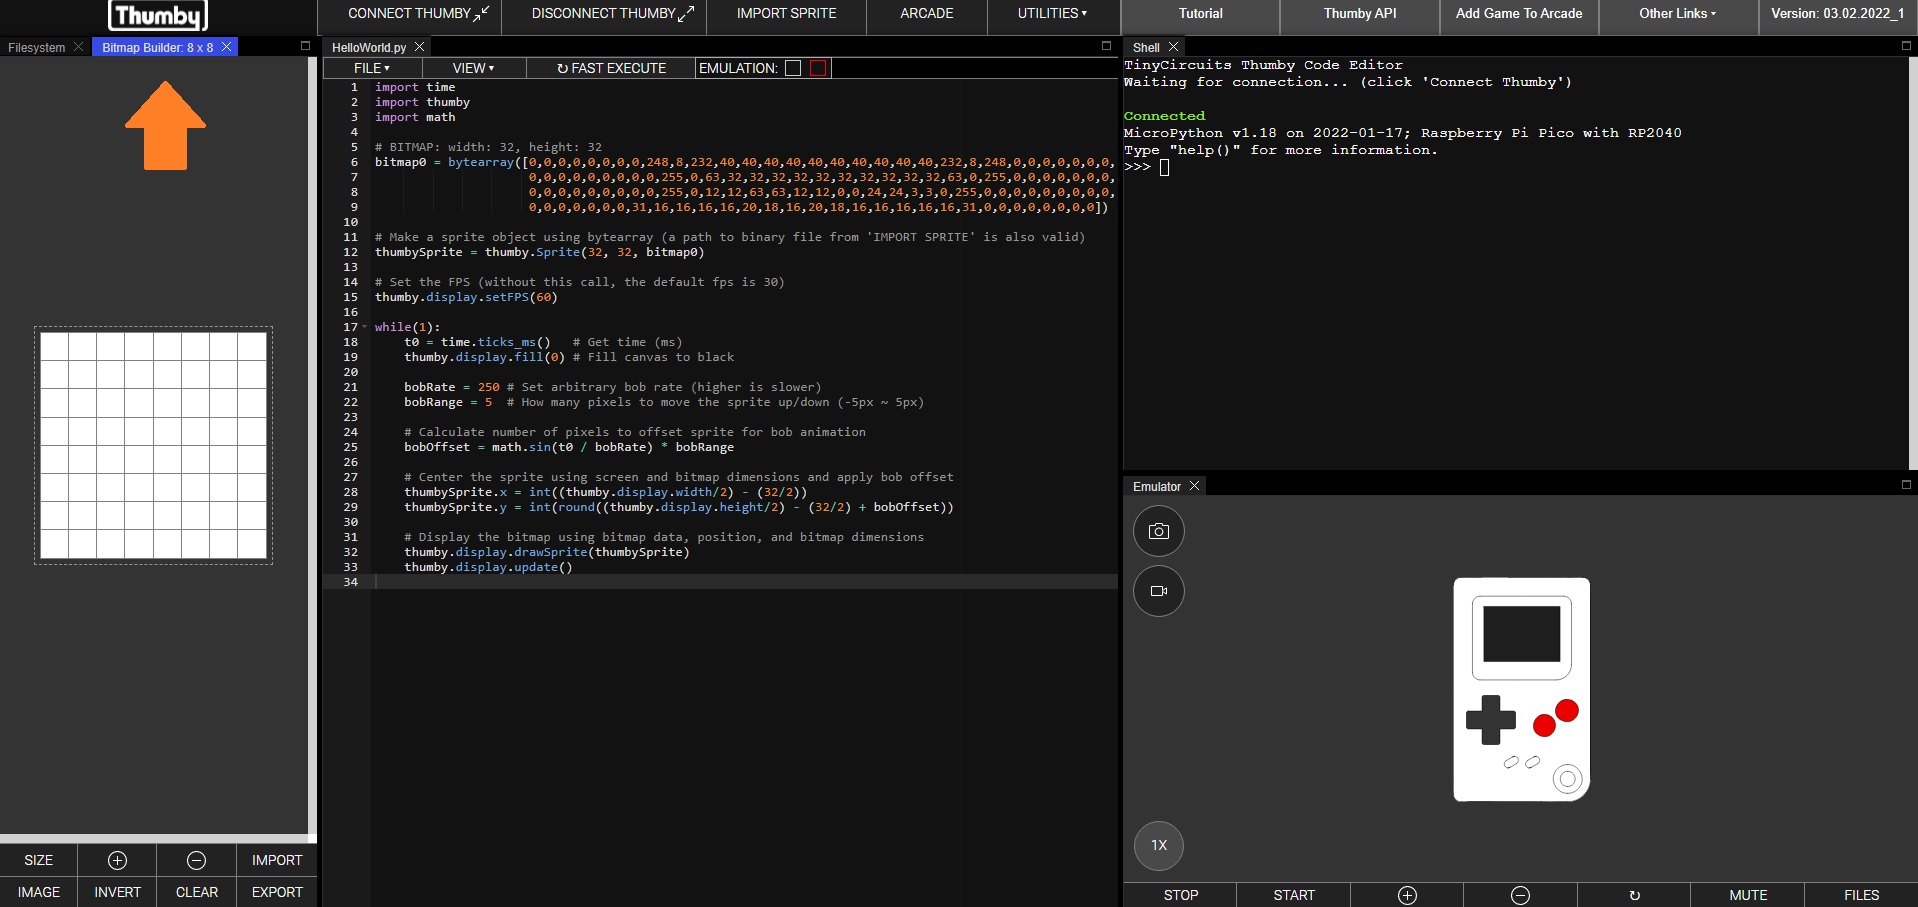 Thumby Code Editor screenshot of file system and emulation